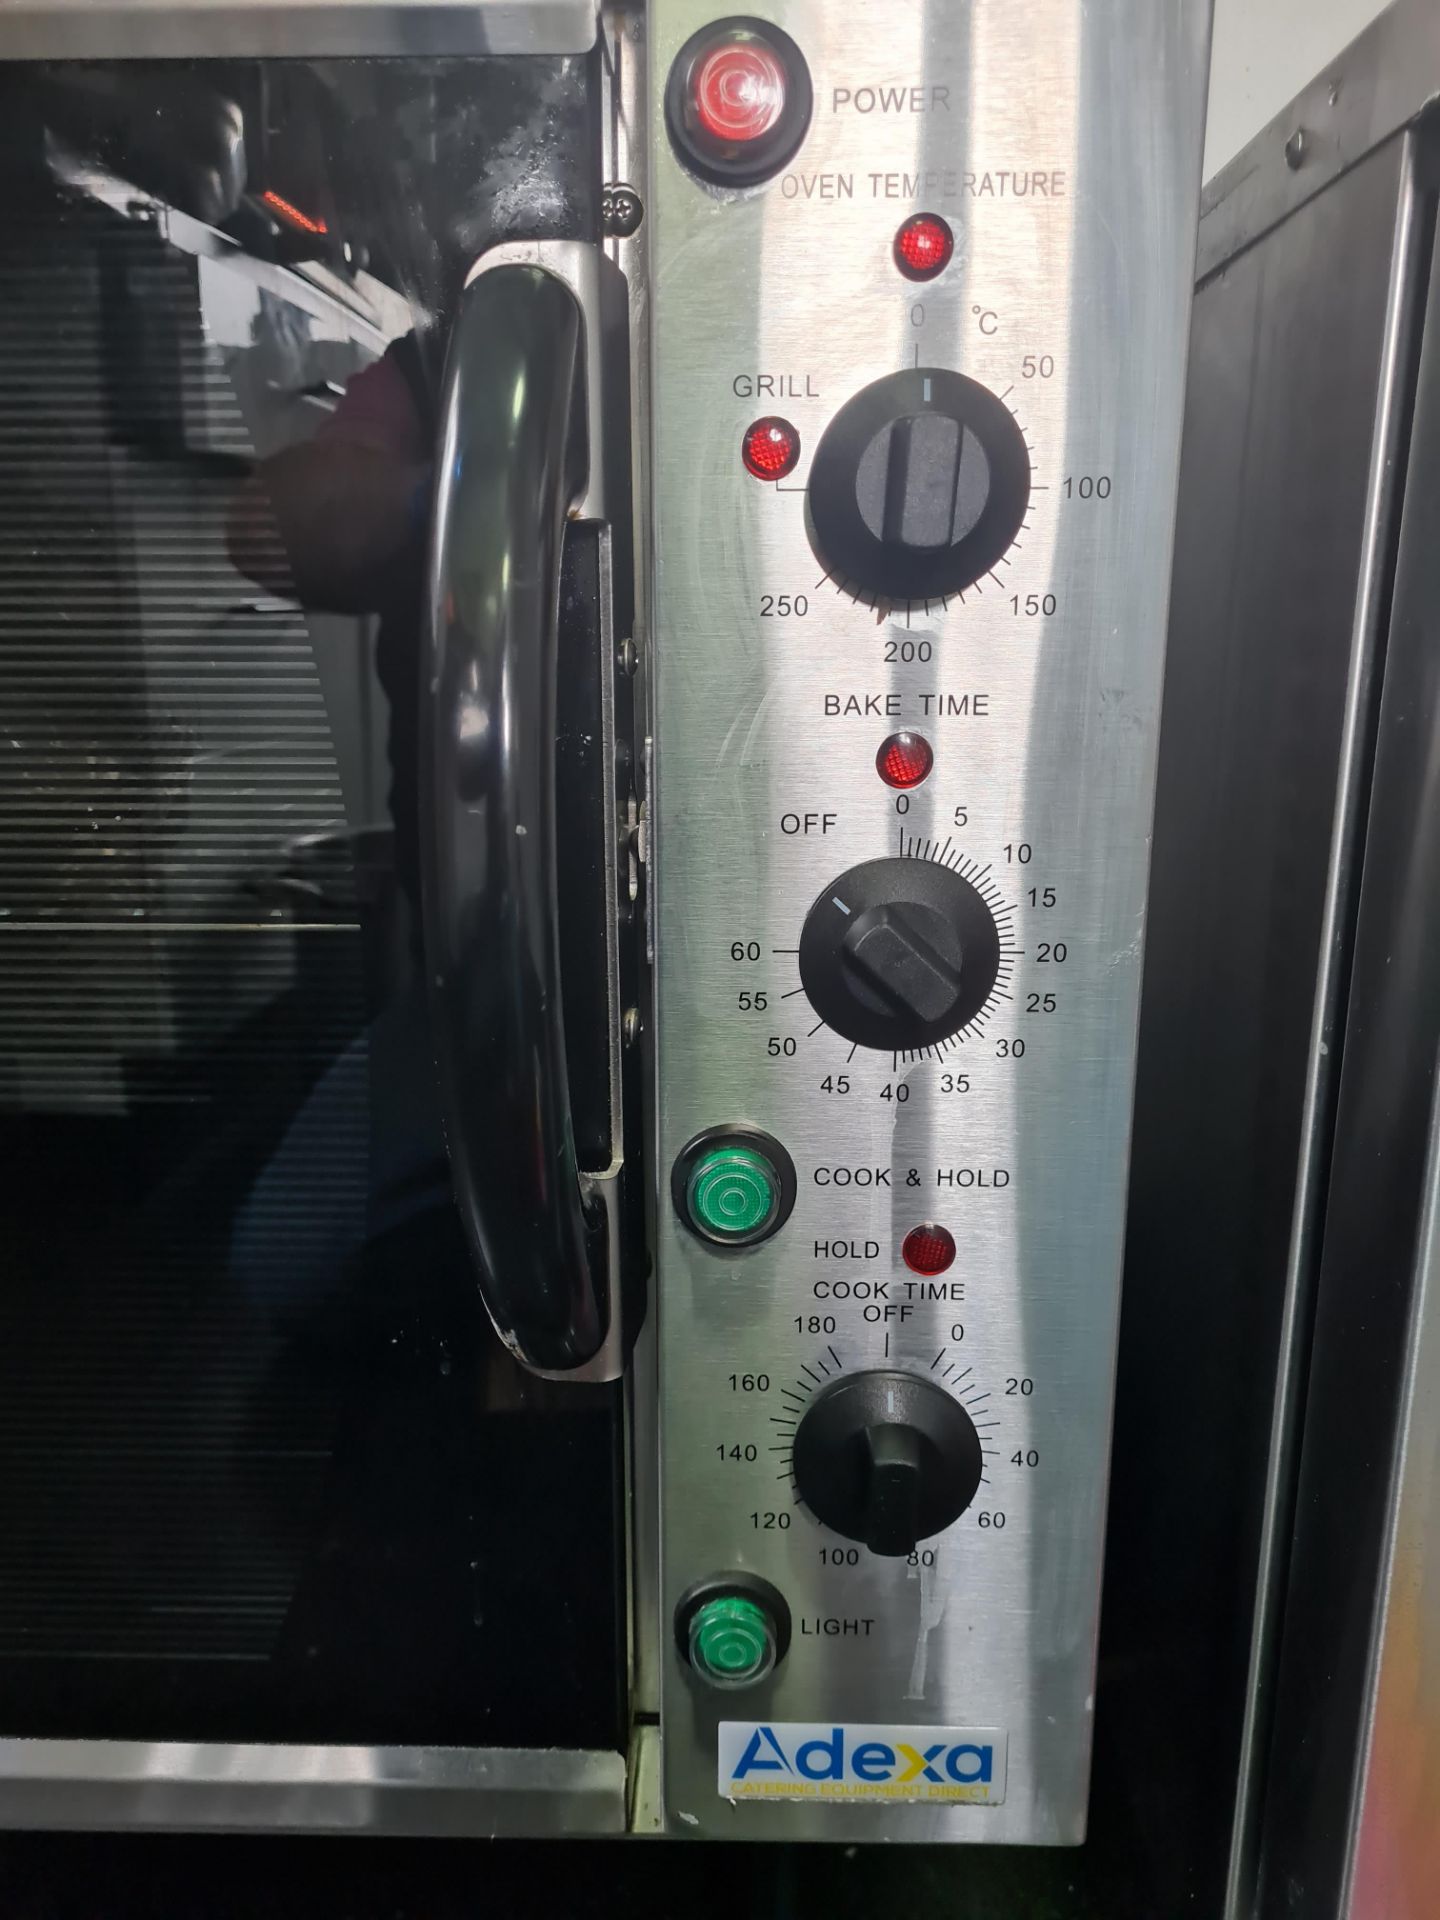 Adexa Convection Oven - Image 16 of 16